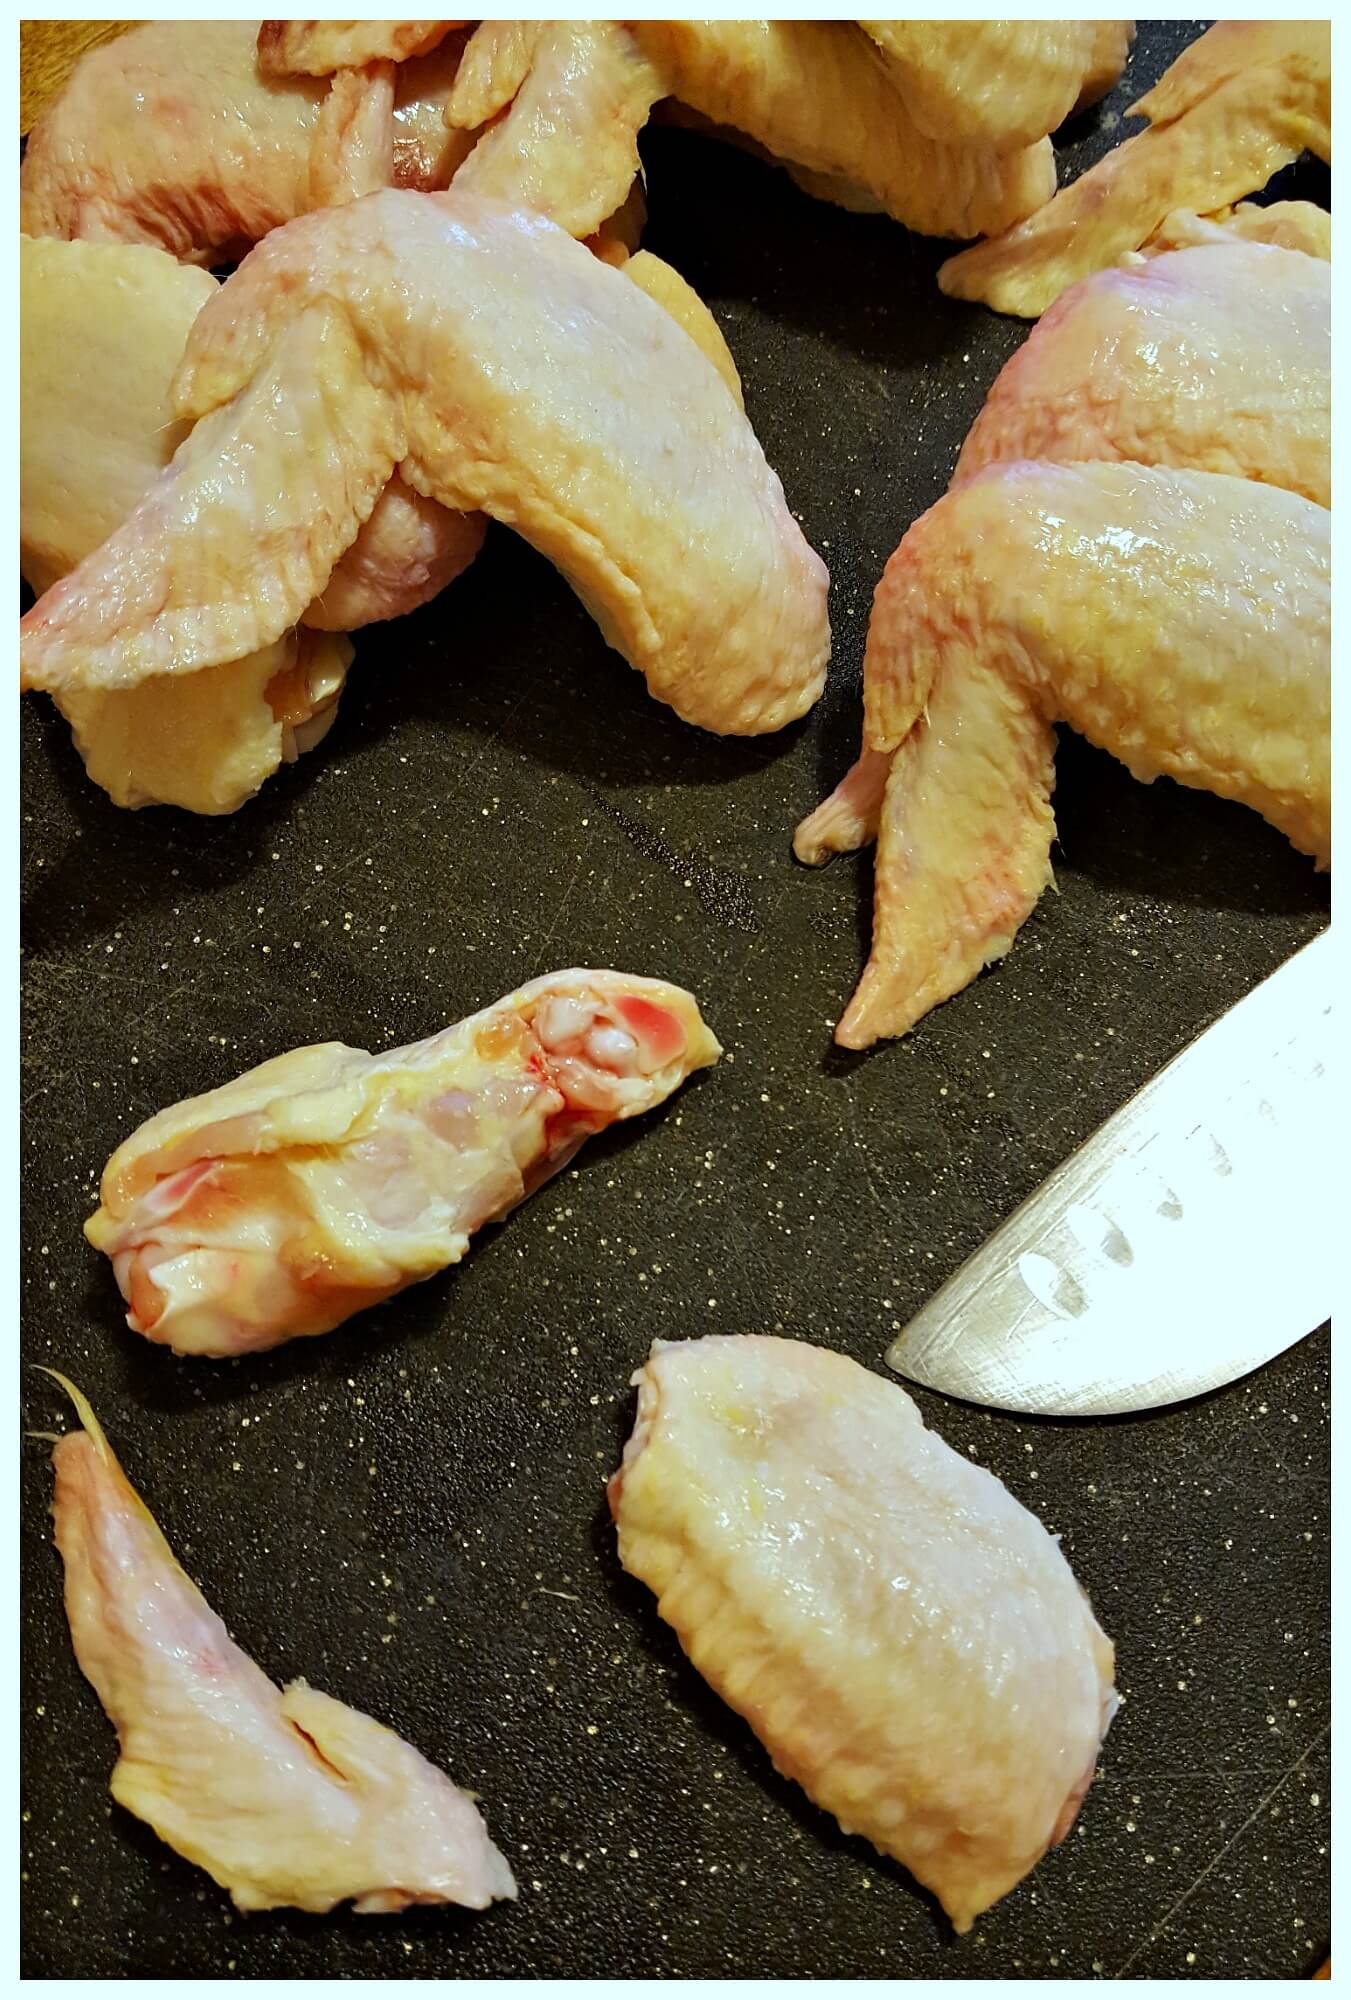 Cutting up chicken wings to separate the drumette and flat pieces